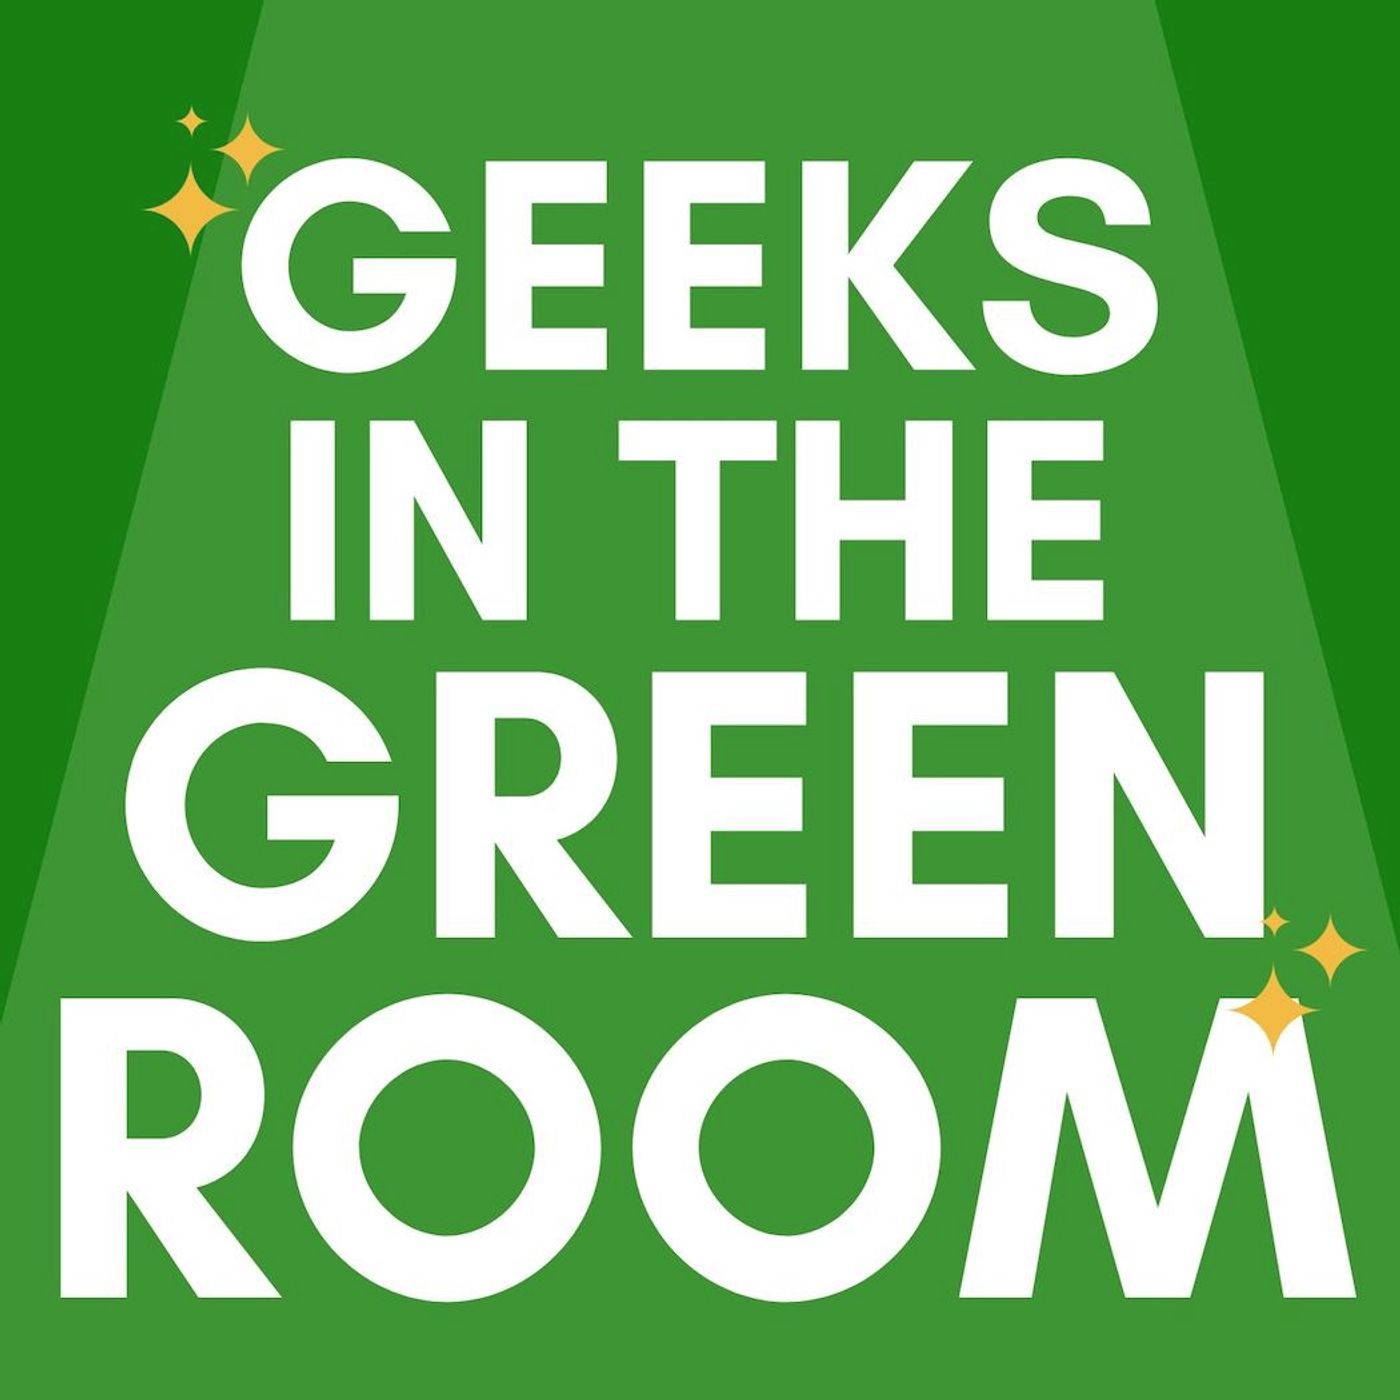 geeks in the green room in white text on a green background